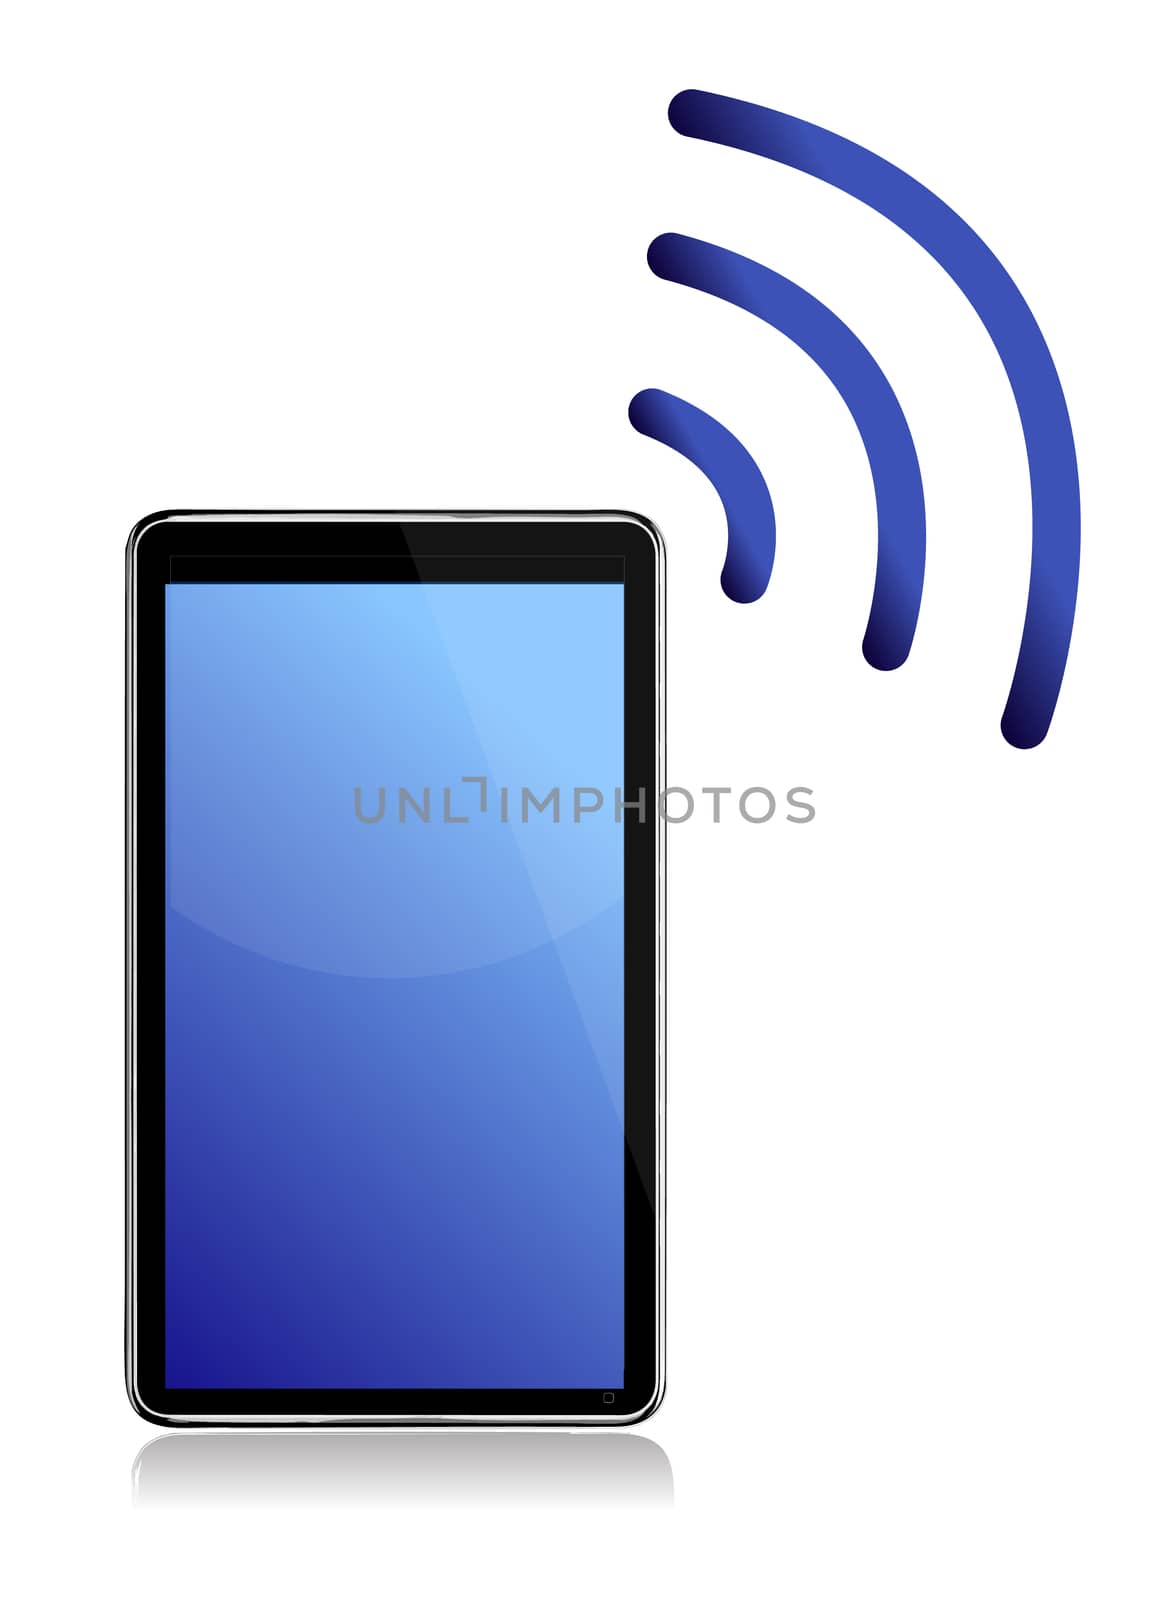 Tablet with wireless connection illustration by alexmillos